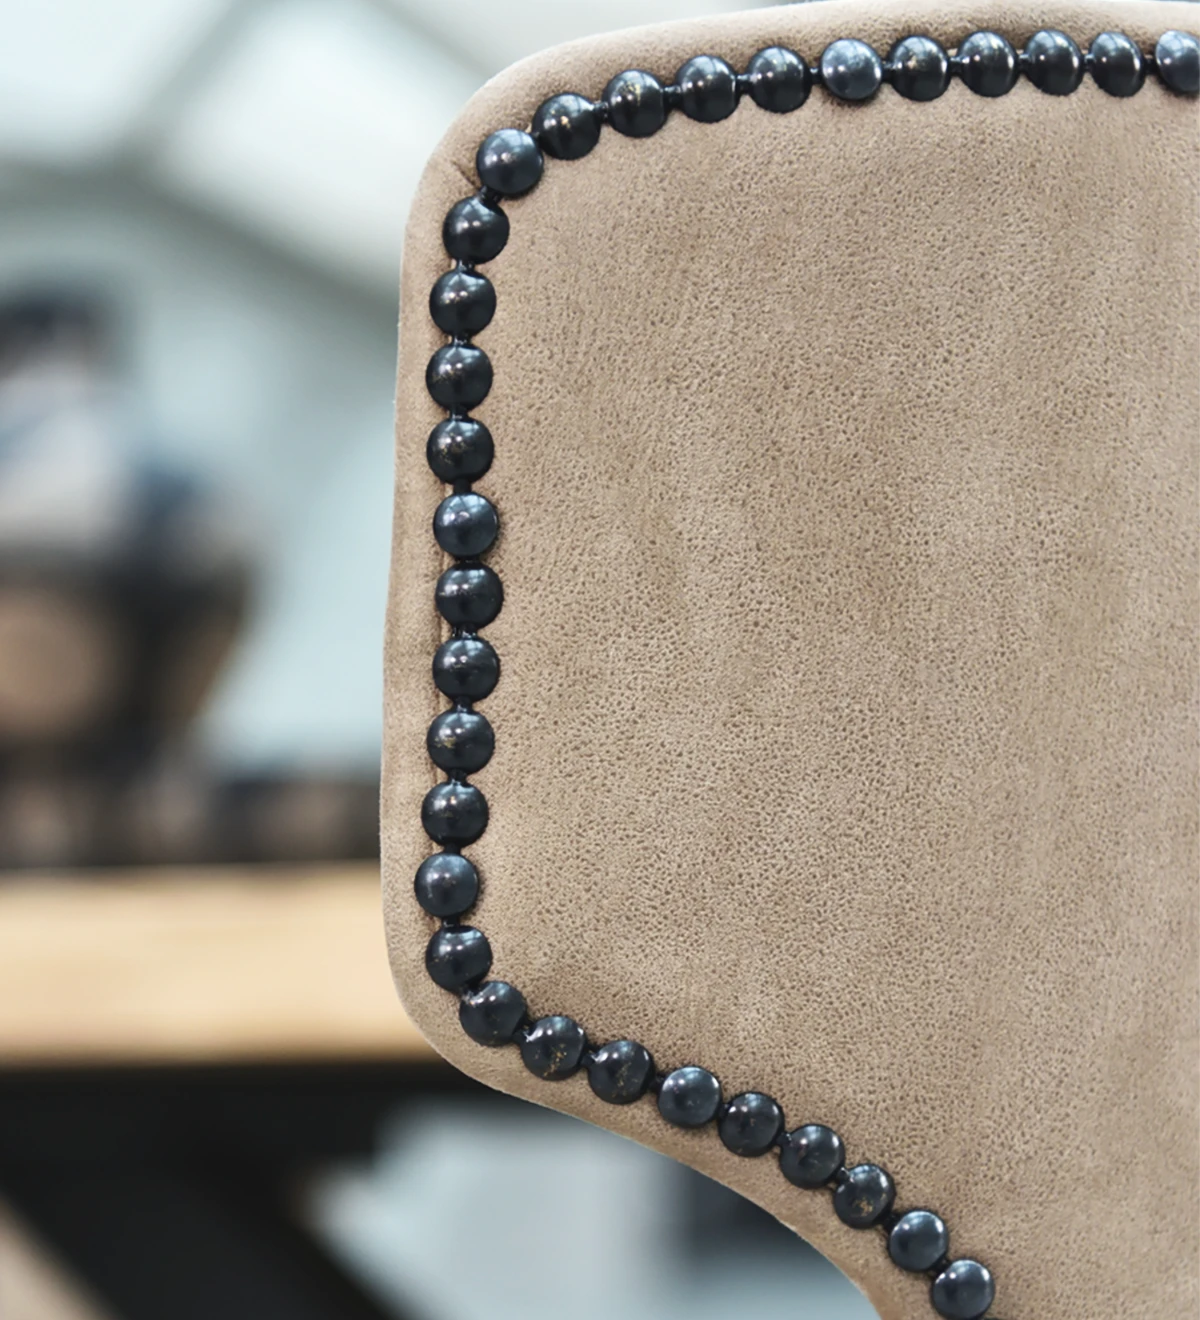 Fabric upholstered chair, with black tack on the back and black lacquered feet.